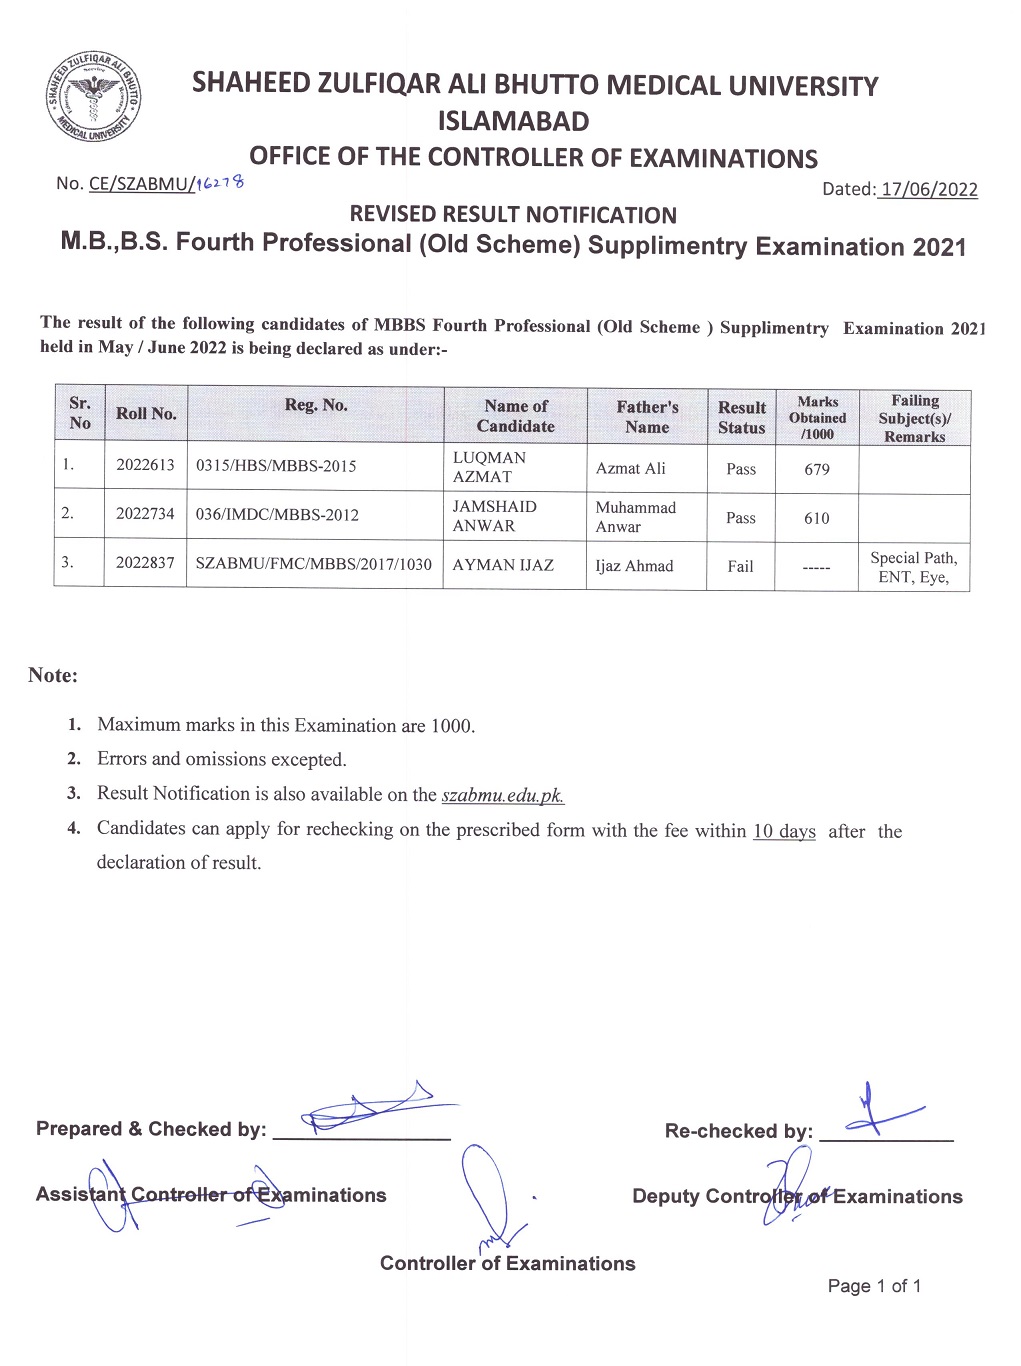 Revised Result Notification - MBBS 4th Professional ( Old Scheme ) Supplementary l Examination 2021